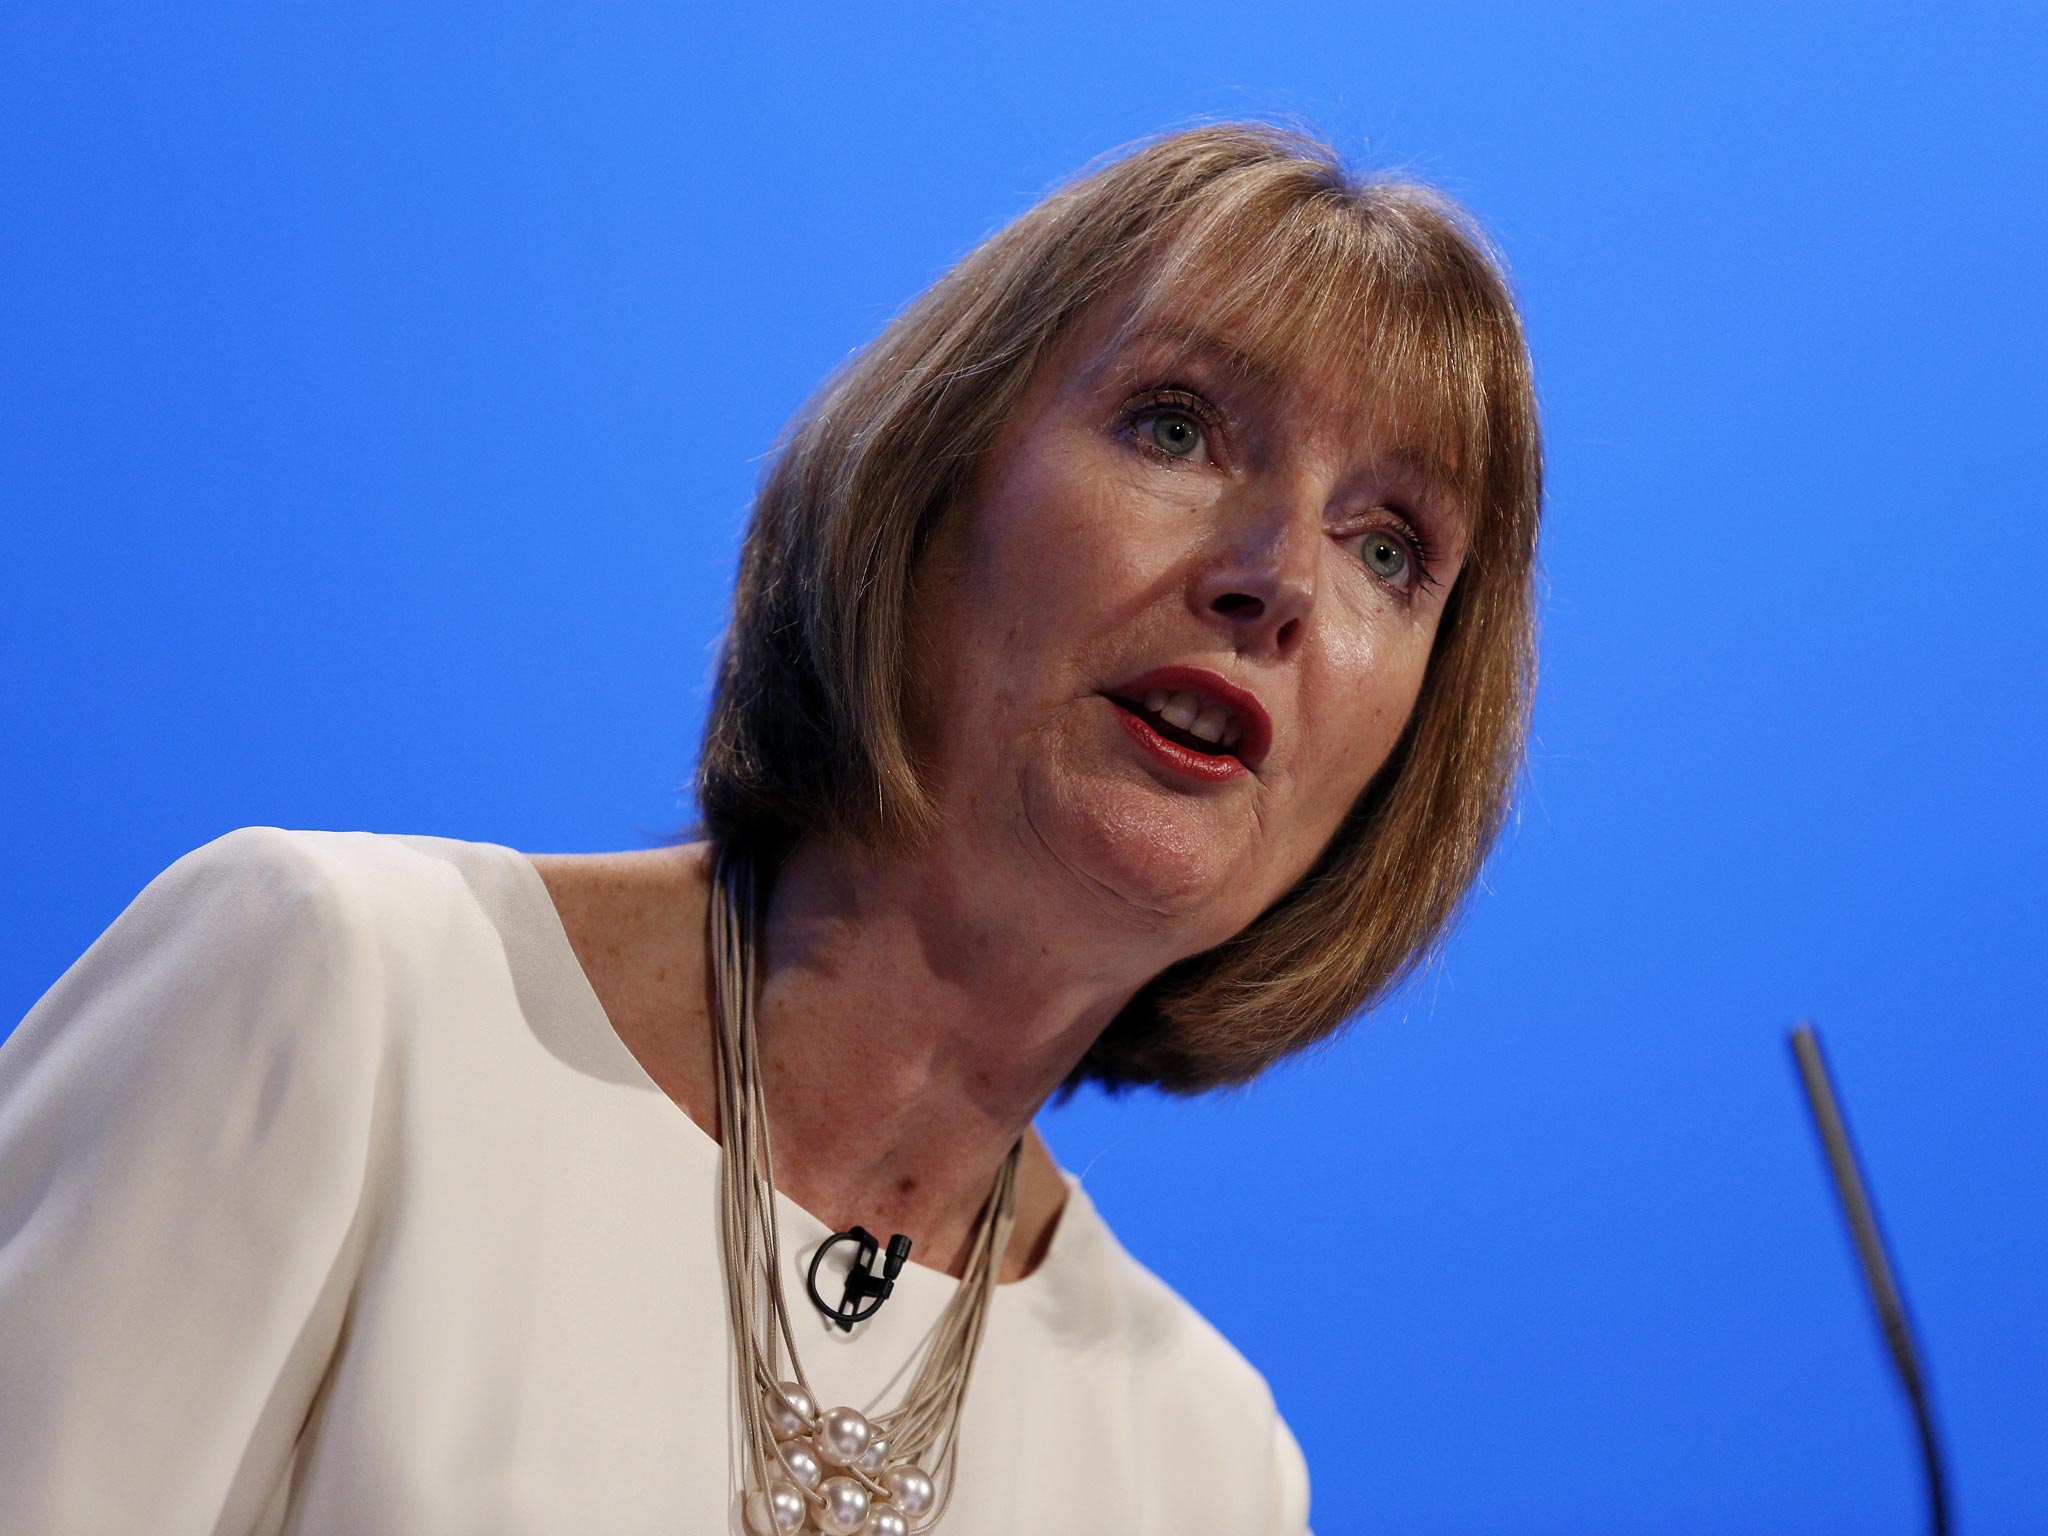 Deputy Labour leader and shadow culture secretary Harriet Harman has been accused by the Daily Mail of failing to answer 'charges' they have levelled against her